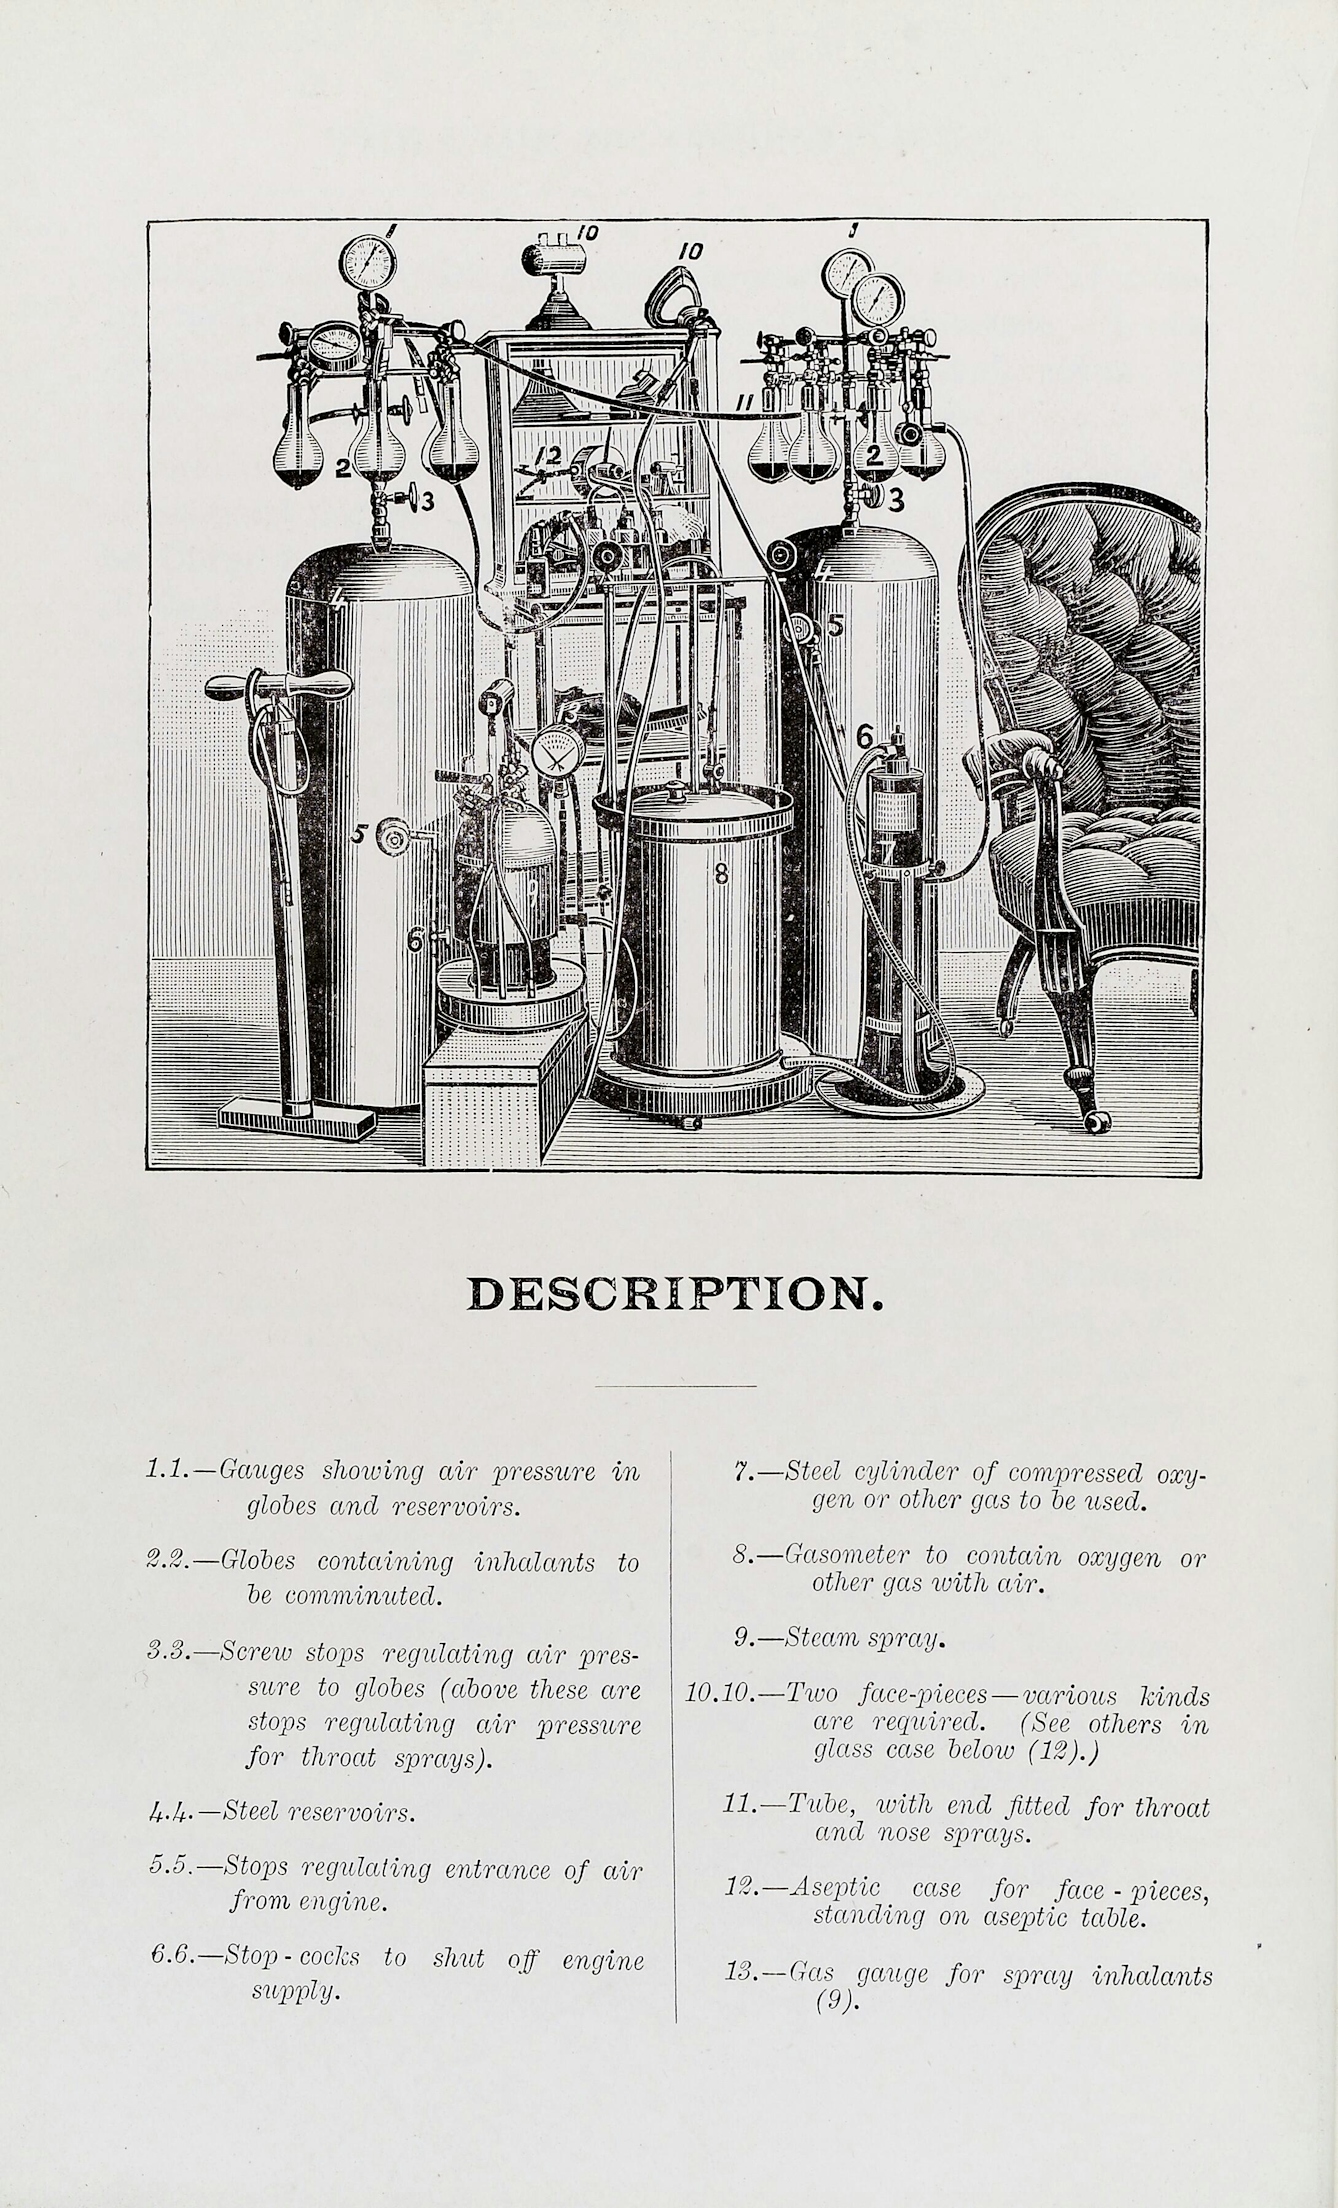 A page from a book, with an engraving illustrating various forms of respiratory equipment; underneath them are detailed descriptions of each piece. 